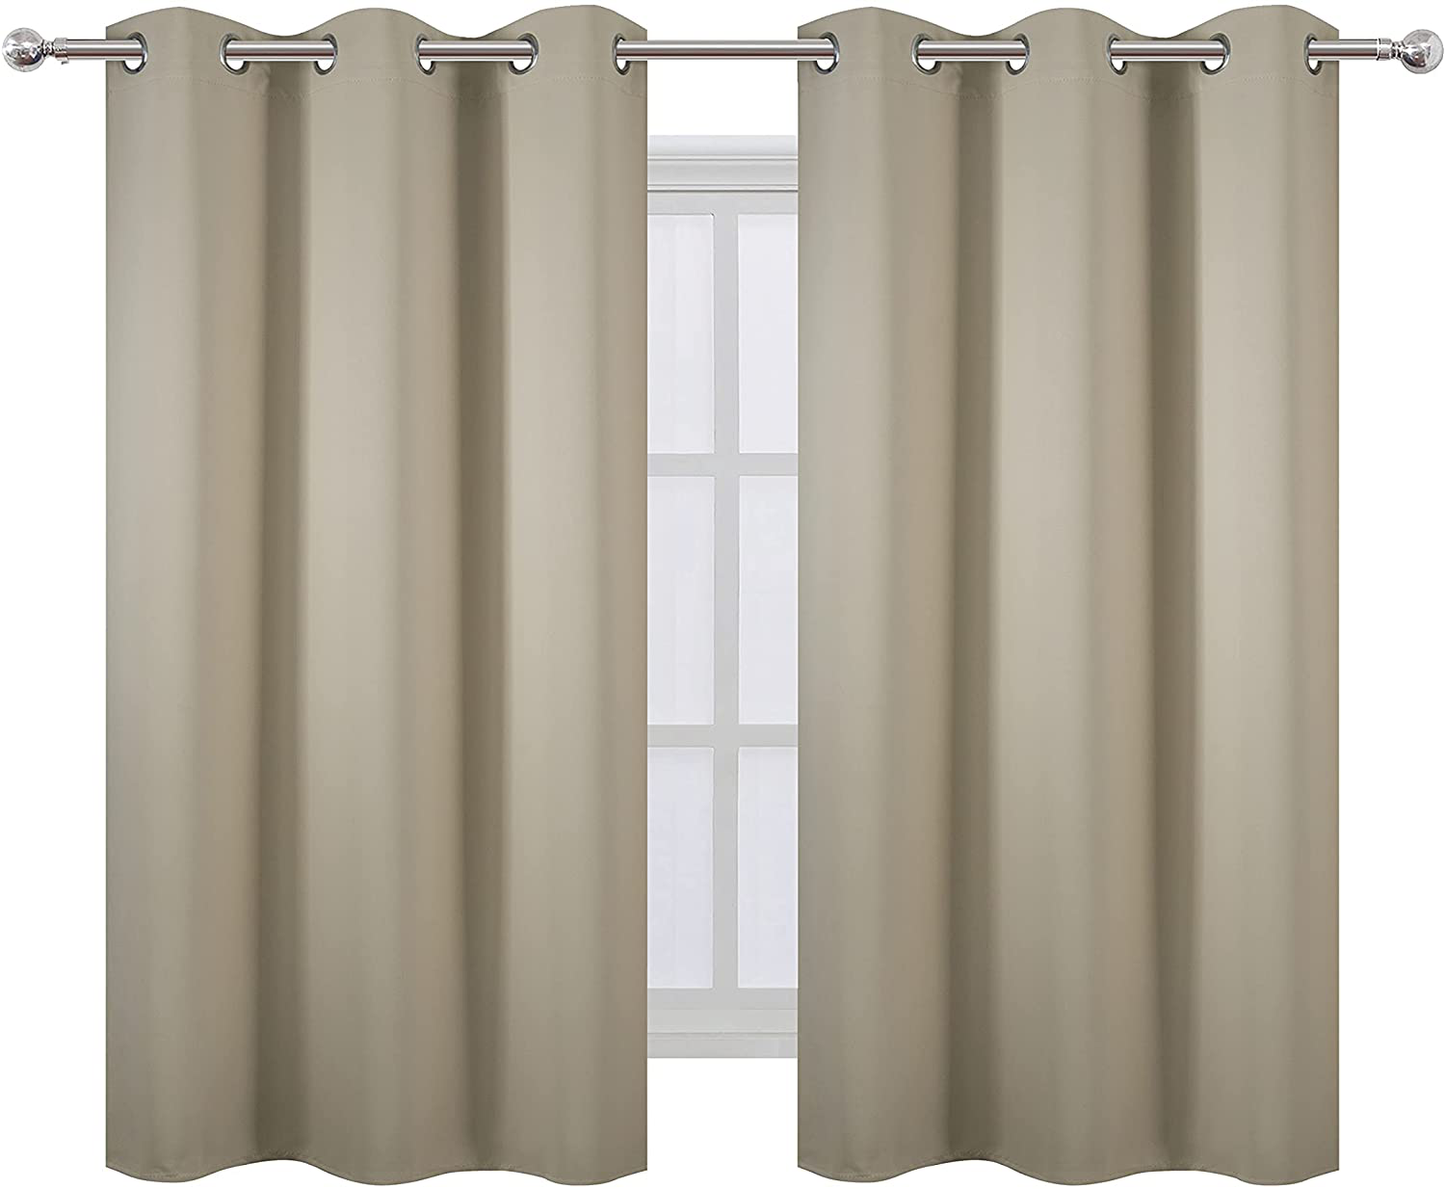 LEMOMO Yellow Thermal Blackout Curtains/42 x 95 Inch/Set of 2 Panels Room Darkening Curtains for Bedroom